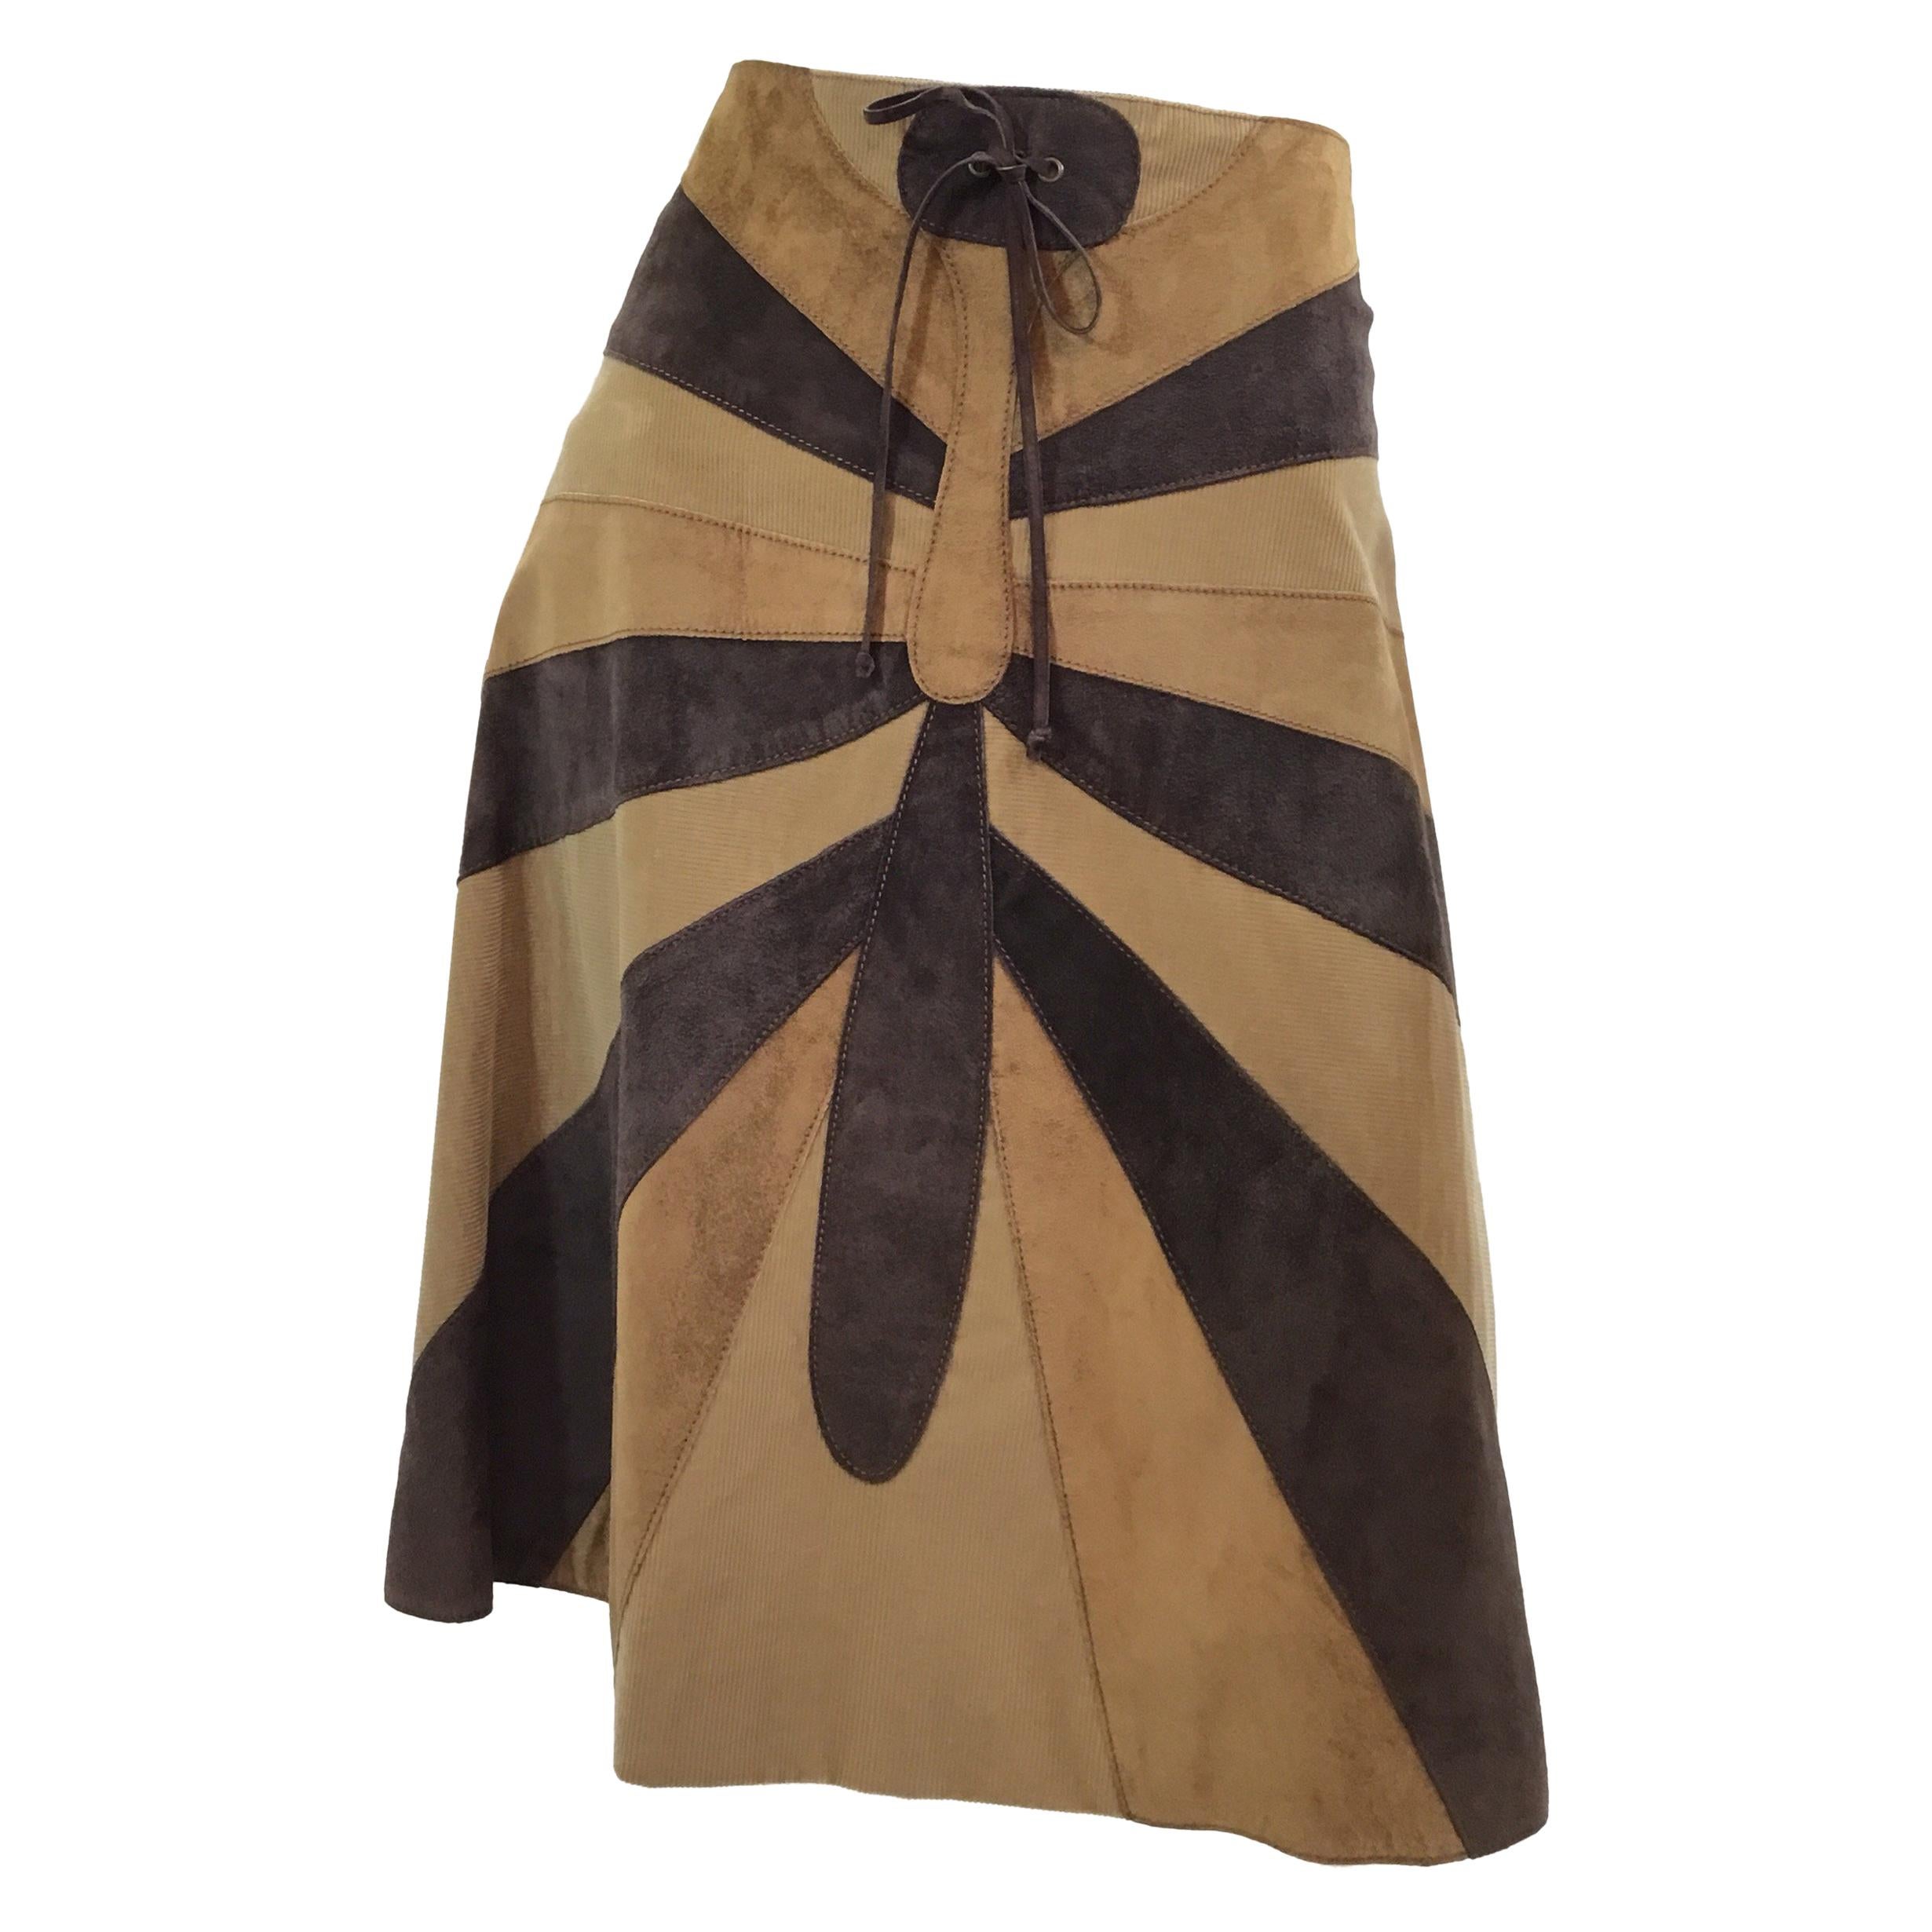 Dolce & Gabbana Suede and Corduroy Butterfly Skirt